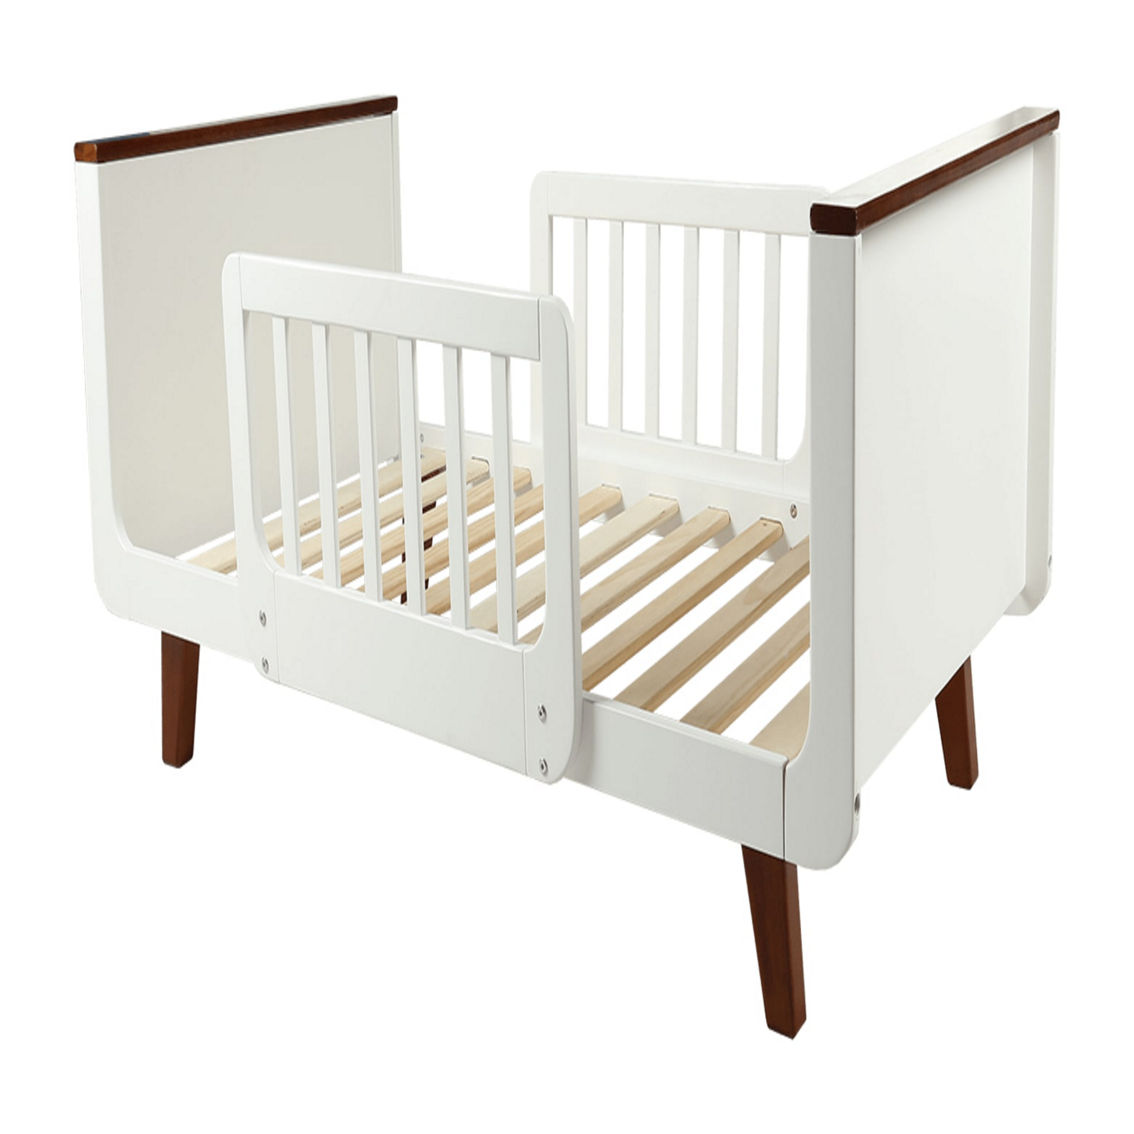 Little Partners MOD Toddler Bed - Image 5 of 5